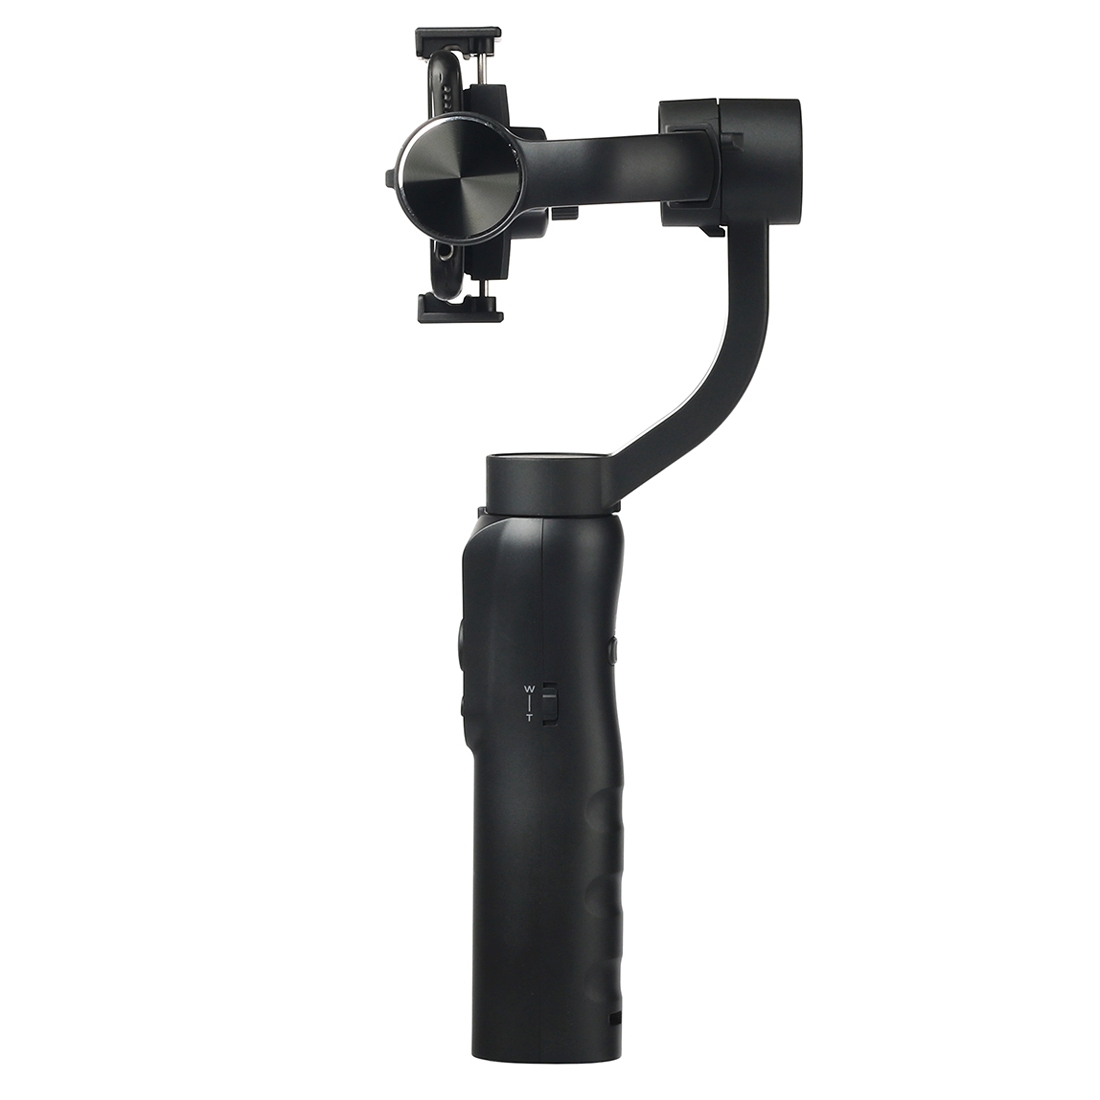 3 axis handheld gimbal stabilizer for phone%20%20(2)